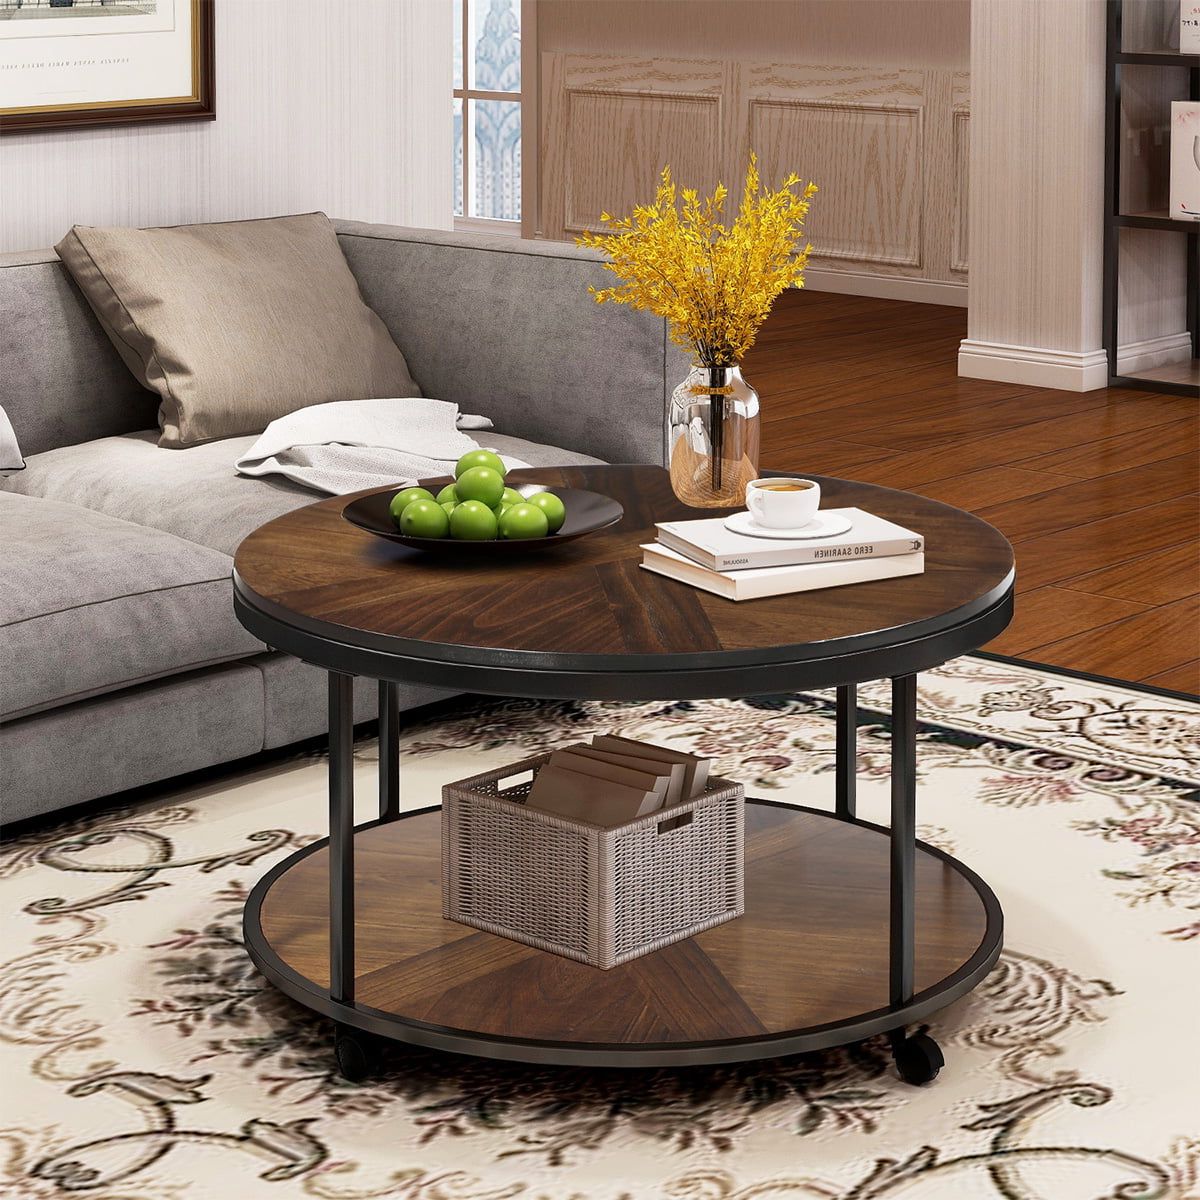 2019 Coffee Tables With Casters In Sentern Round Coffee Table With Caster Wheels And Unique Textured (Photo 2 of 15)